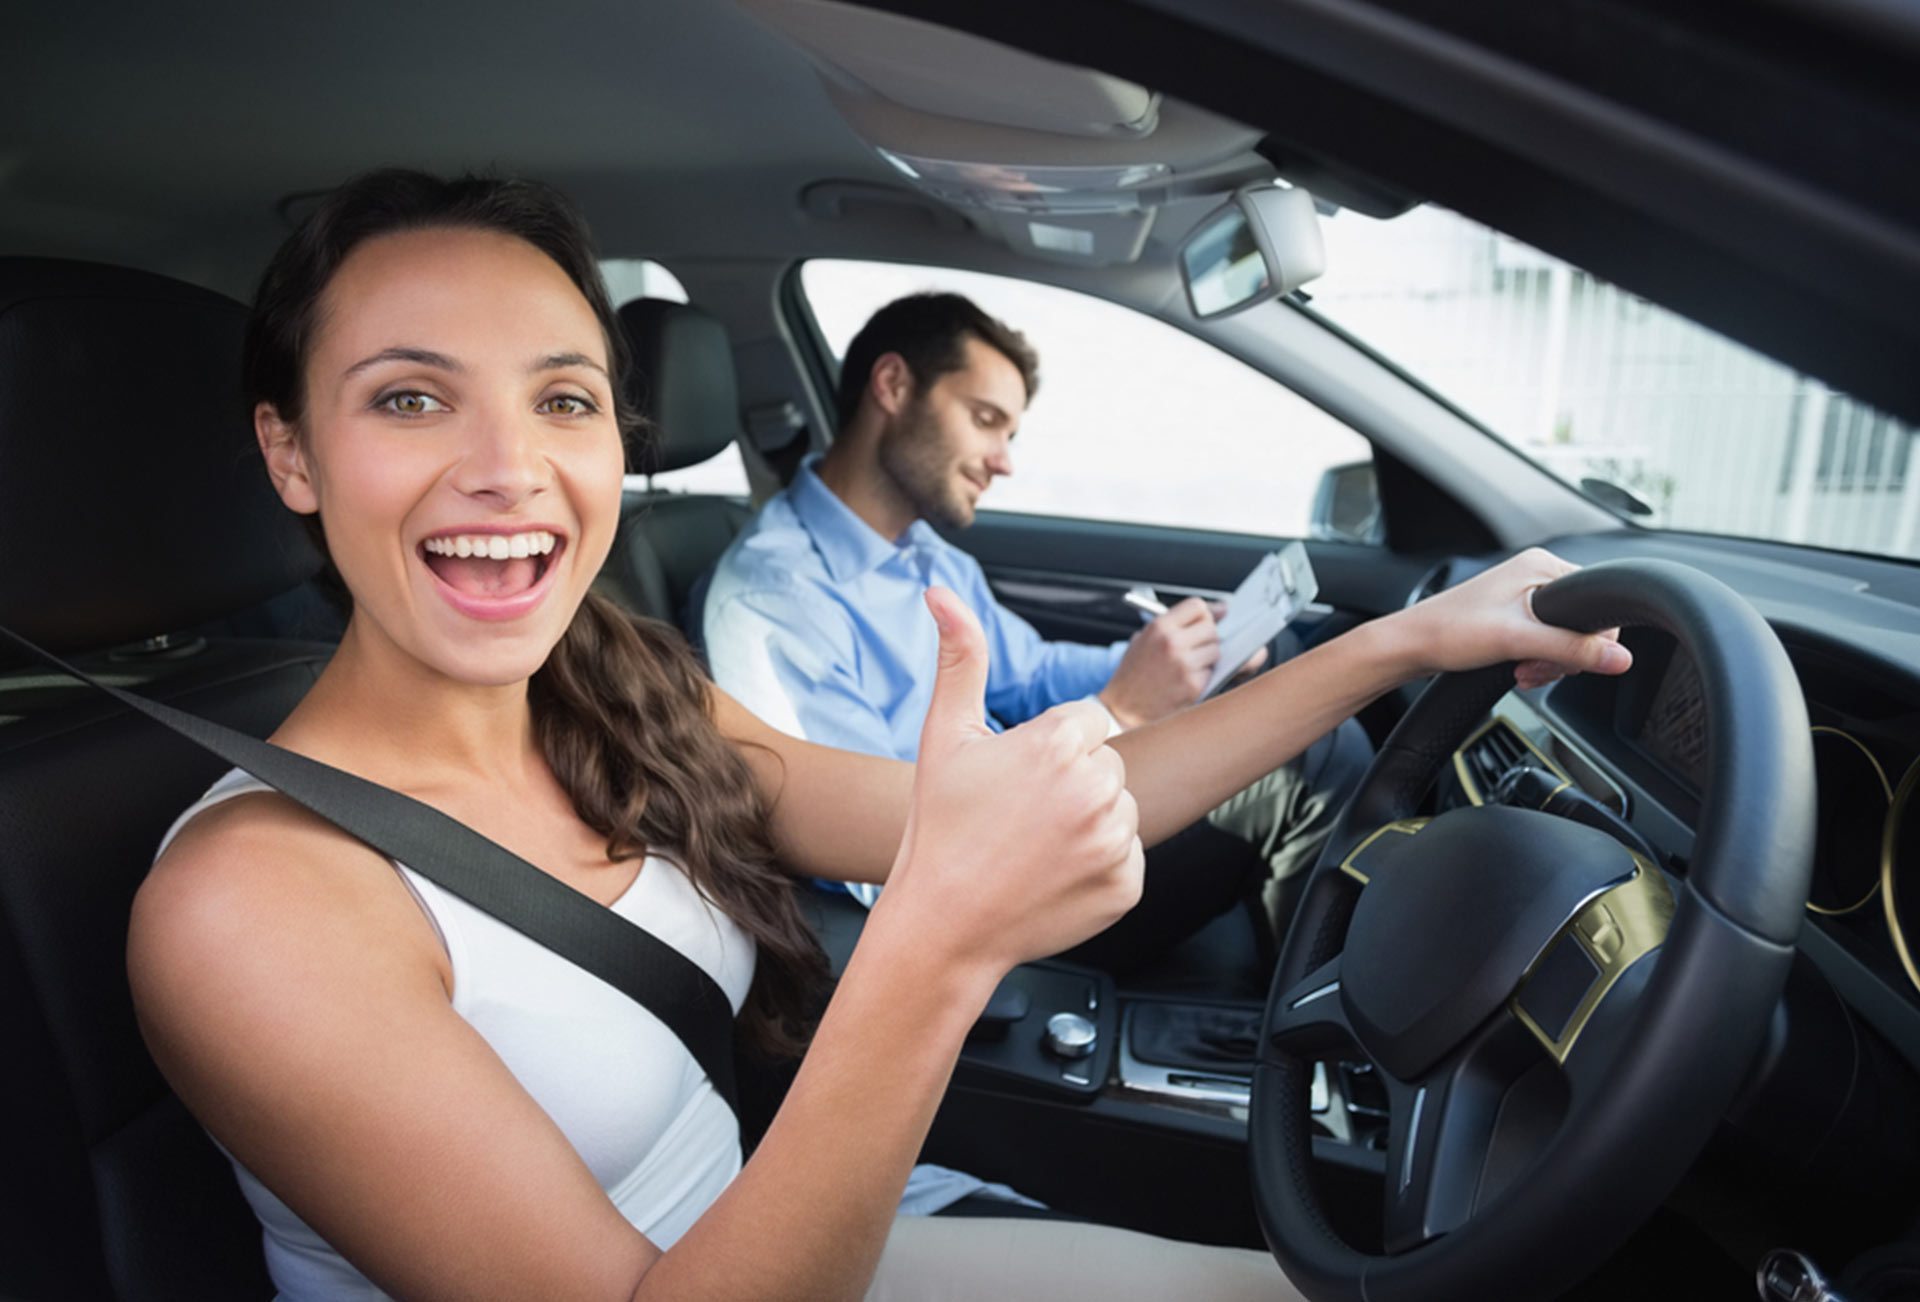 online driving classes and courses Gold Driving school